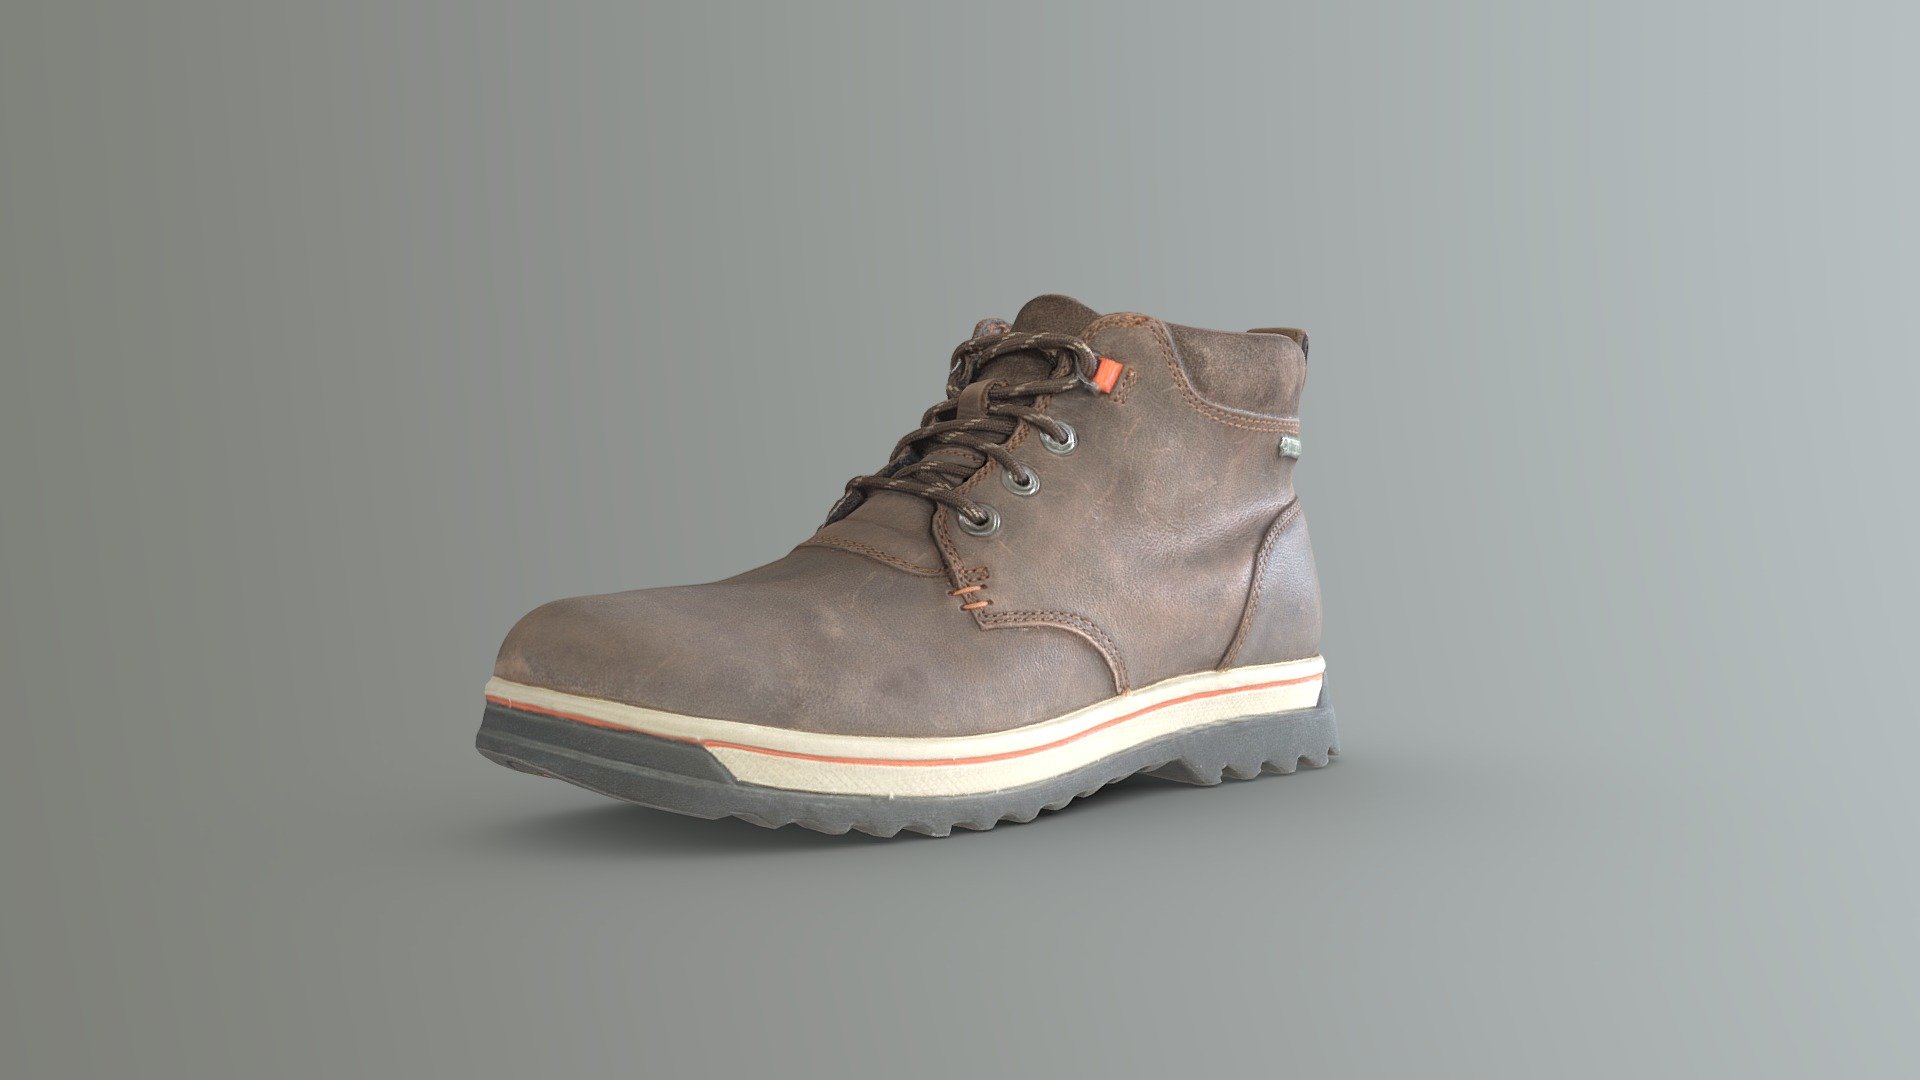 Scan of my new incredibly waterproof boots, Clarks Ripwayhill, made with PhotoScan and ZBrush, tried to get a photorealistic look as much as I can - Clarks Ripwayhill - 3D model by Juan (@juane3d) 3d model